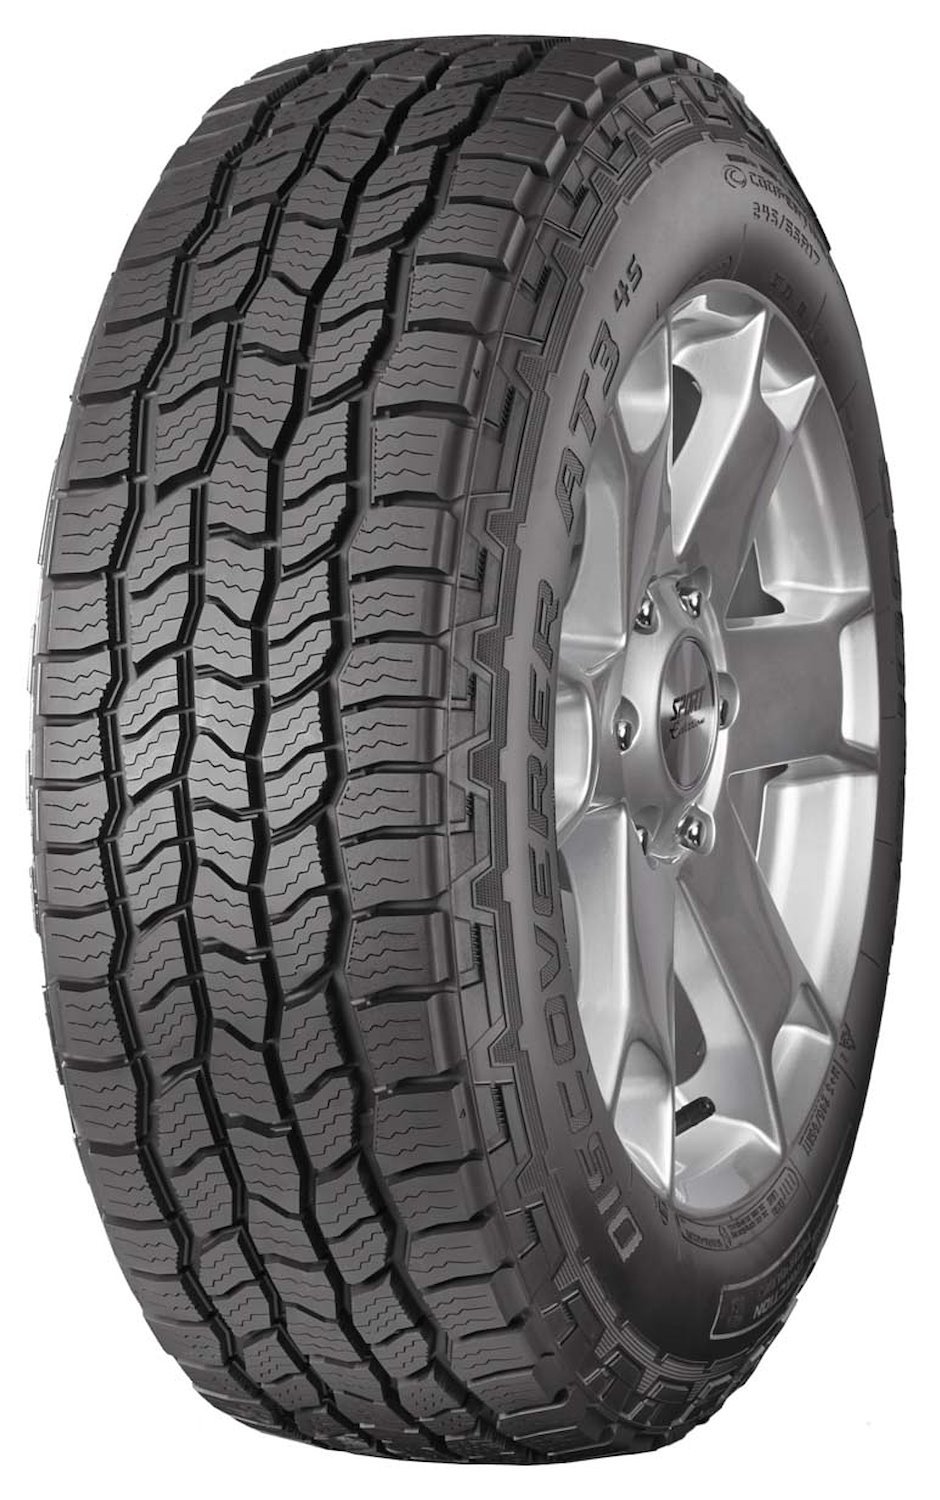 Discoverer AT3 4S All-Terrain Tire, 235/75R15